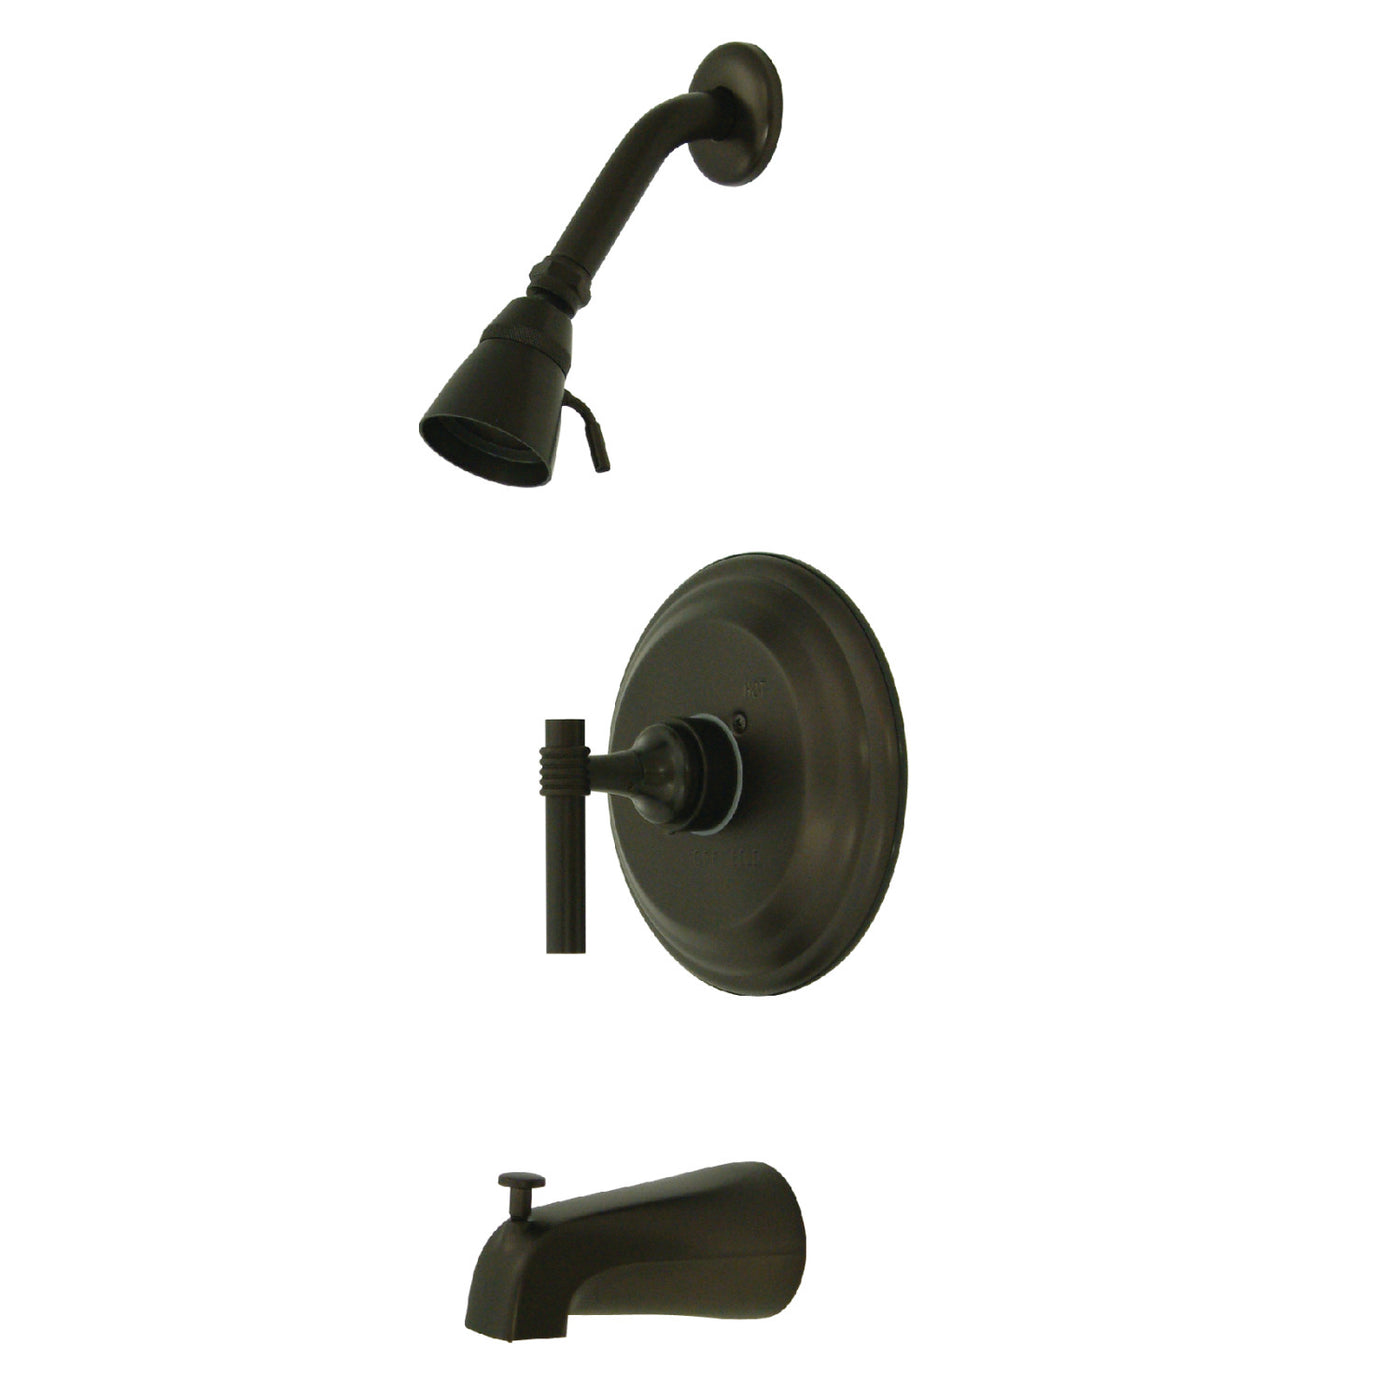 Elements of Design EB2635ML Tub and Shower Faucet, Oil Rubbed Bronze